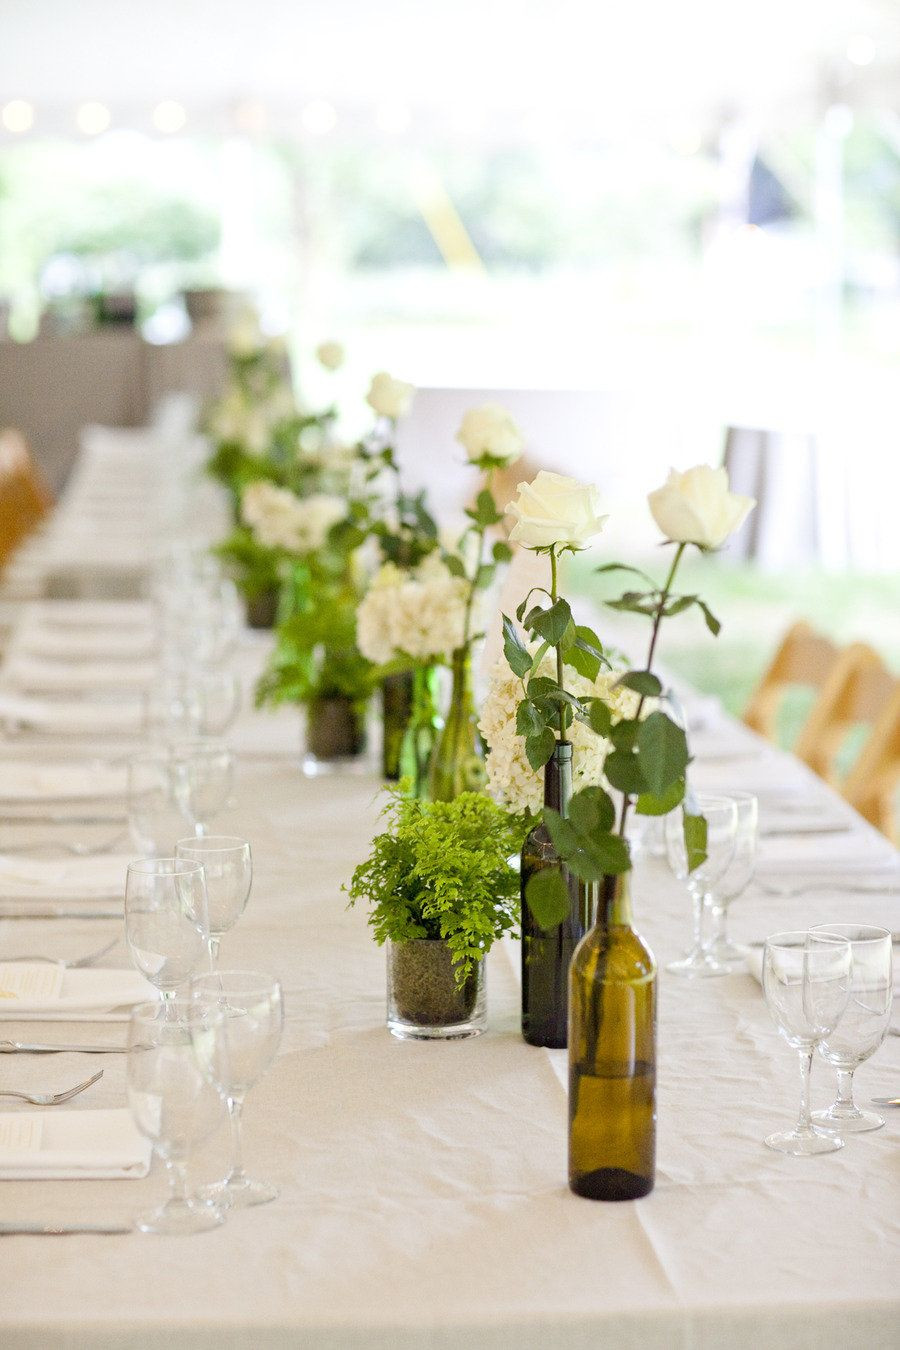 24 Fashionable Single Stem Rose Vase 2024 free download single stem rose vase of saugerties wedding at arrowfield estate by mel co centerpieces within wine bottles as vases for centerpieces photo mel co